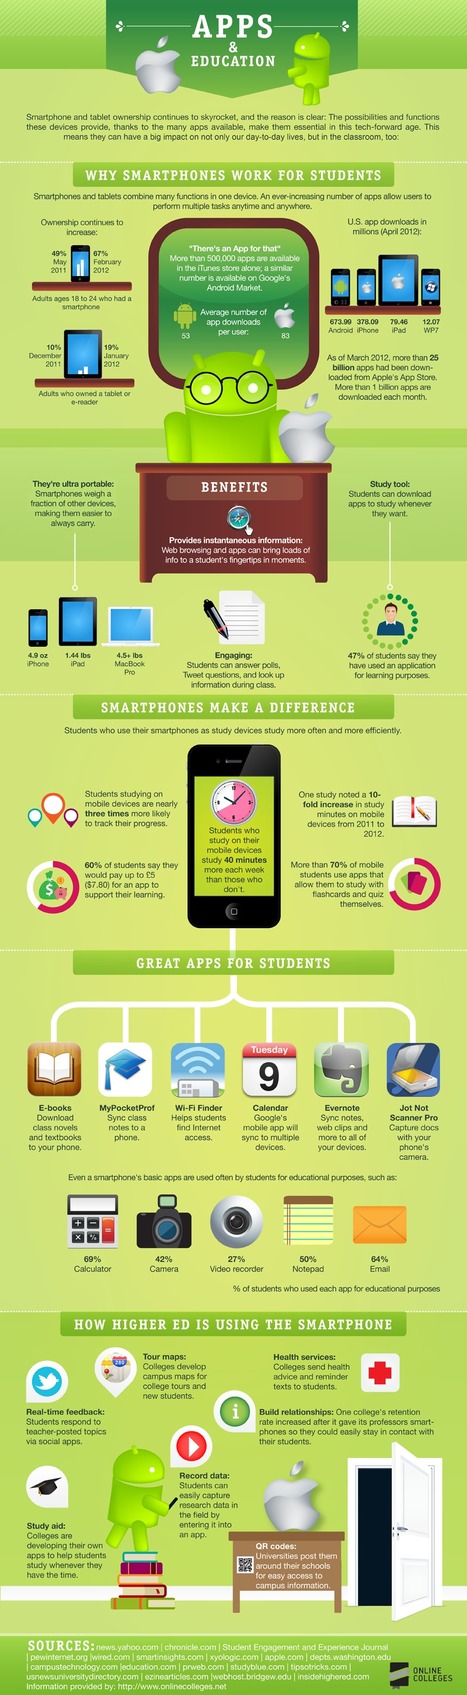 Trends | Infographic: Apps and Education | Apps and Widgets for any use, mostly for education and FREE | Scoop.it